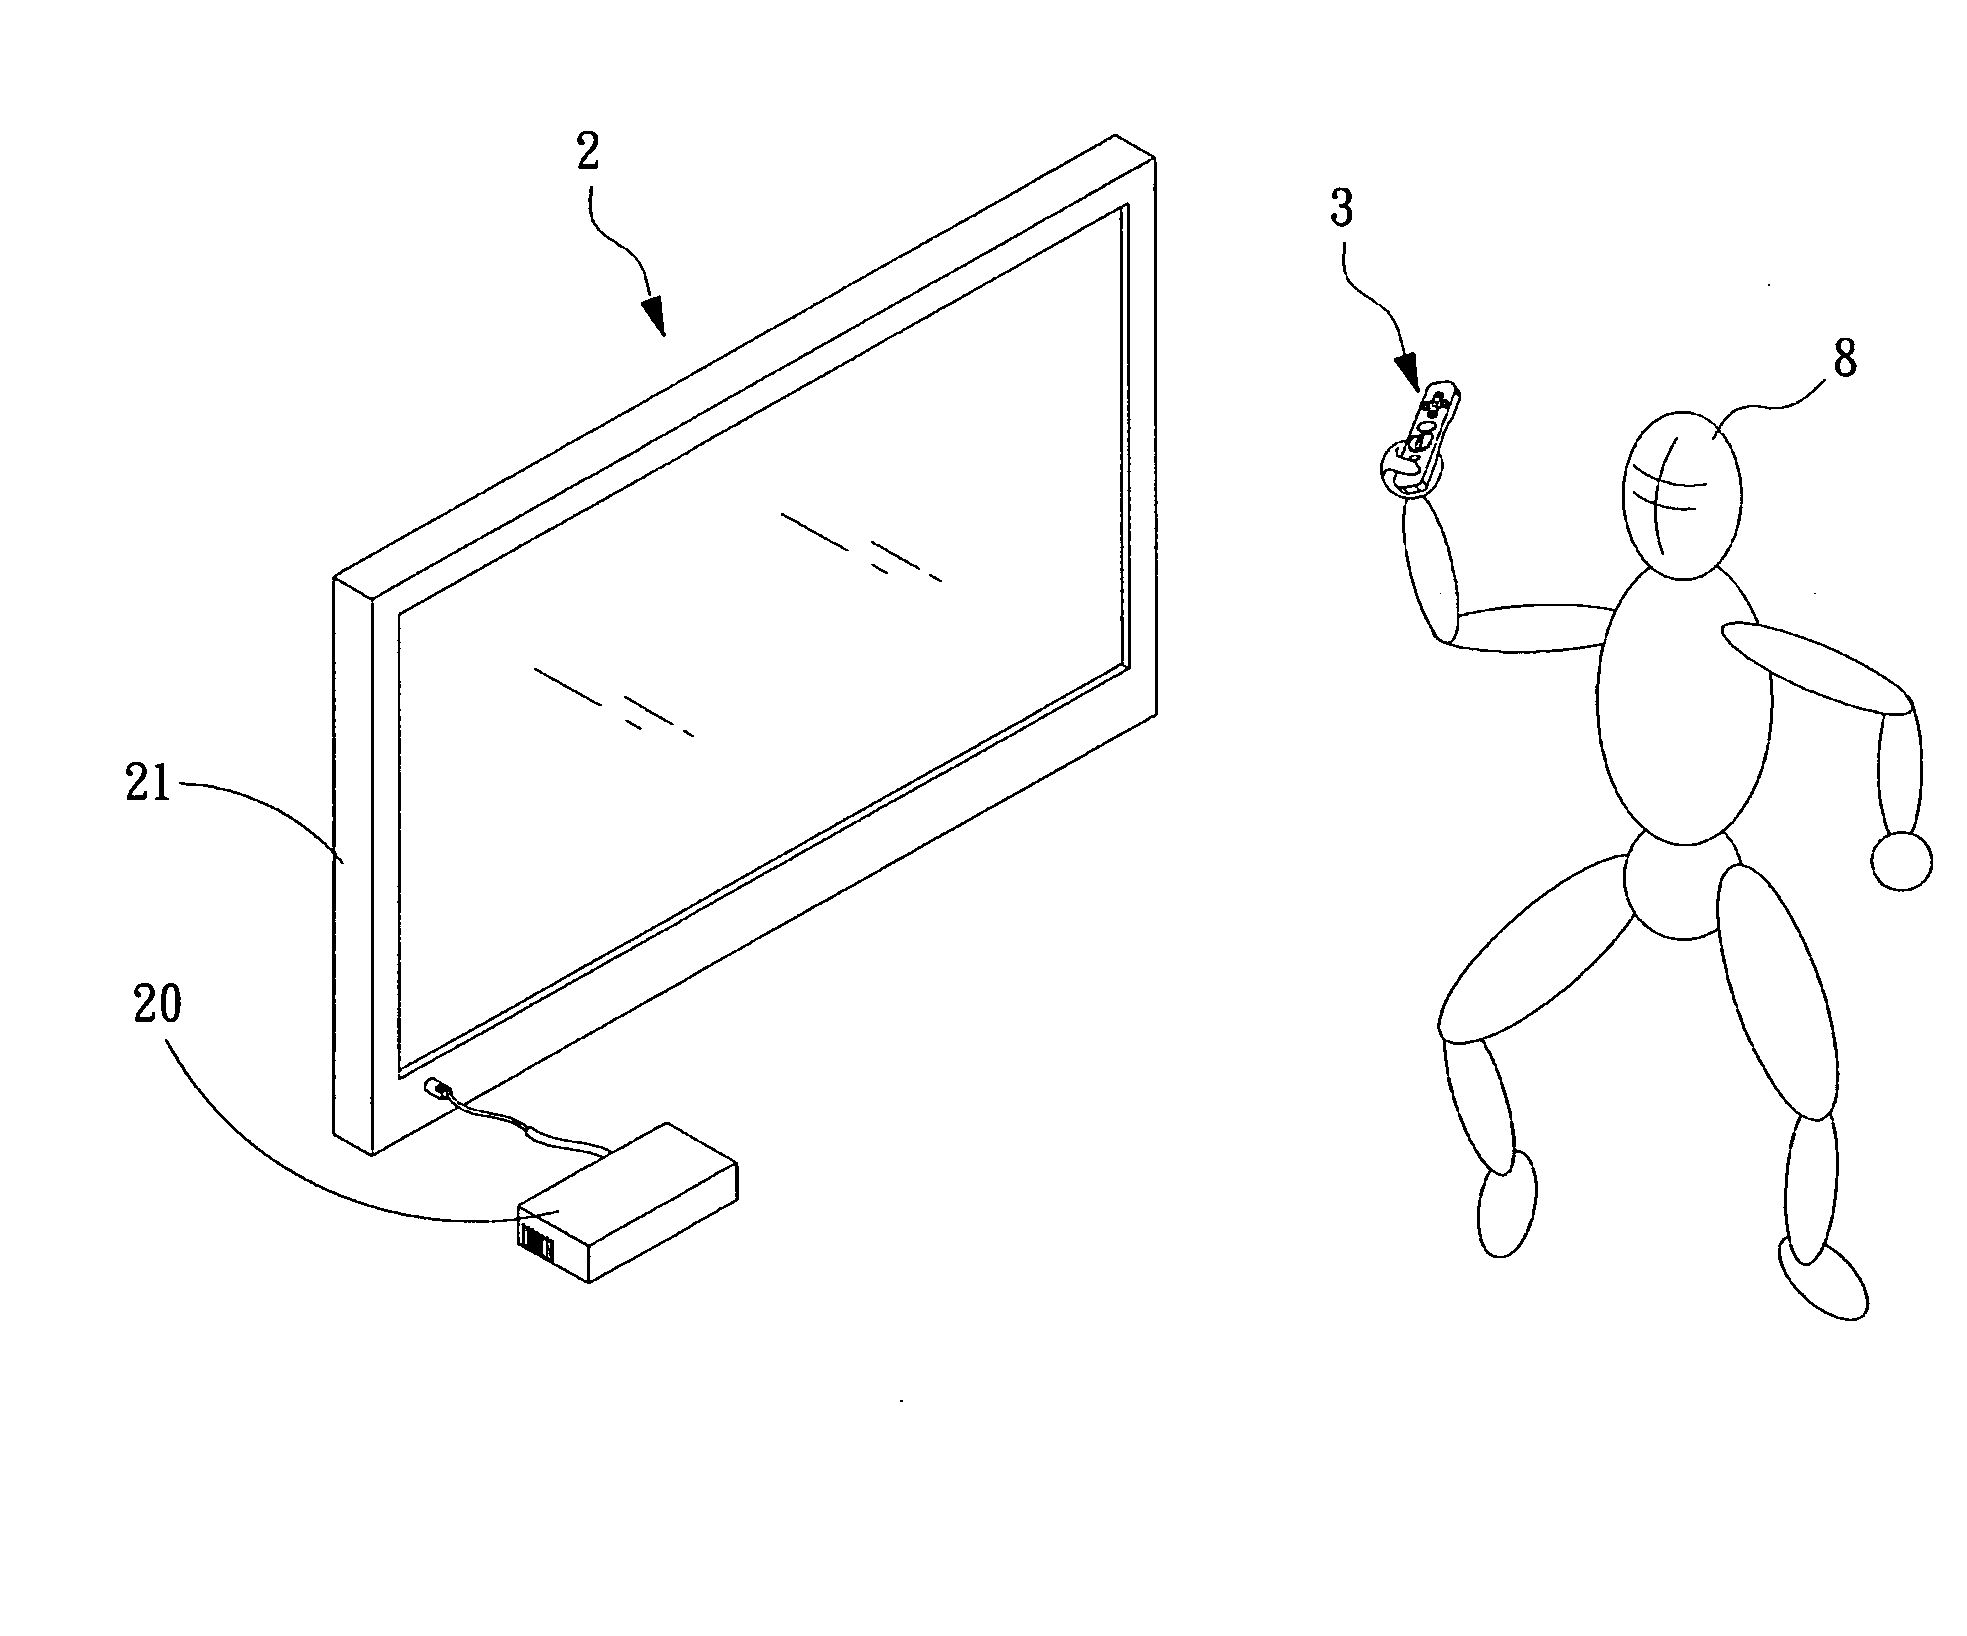 Interactive pointing device